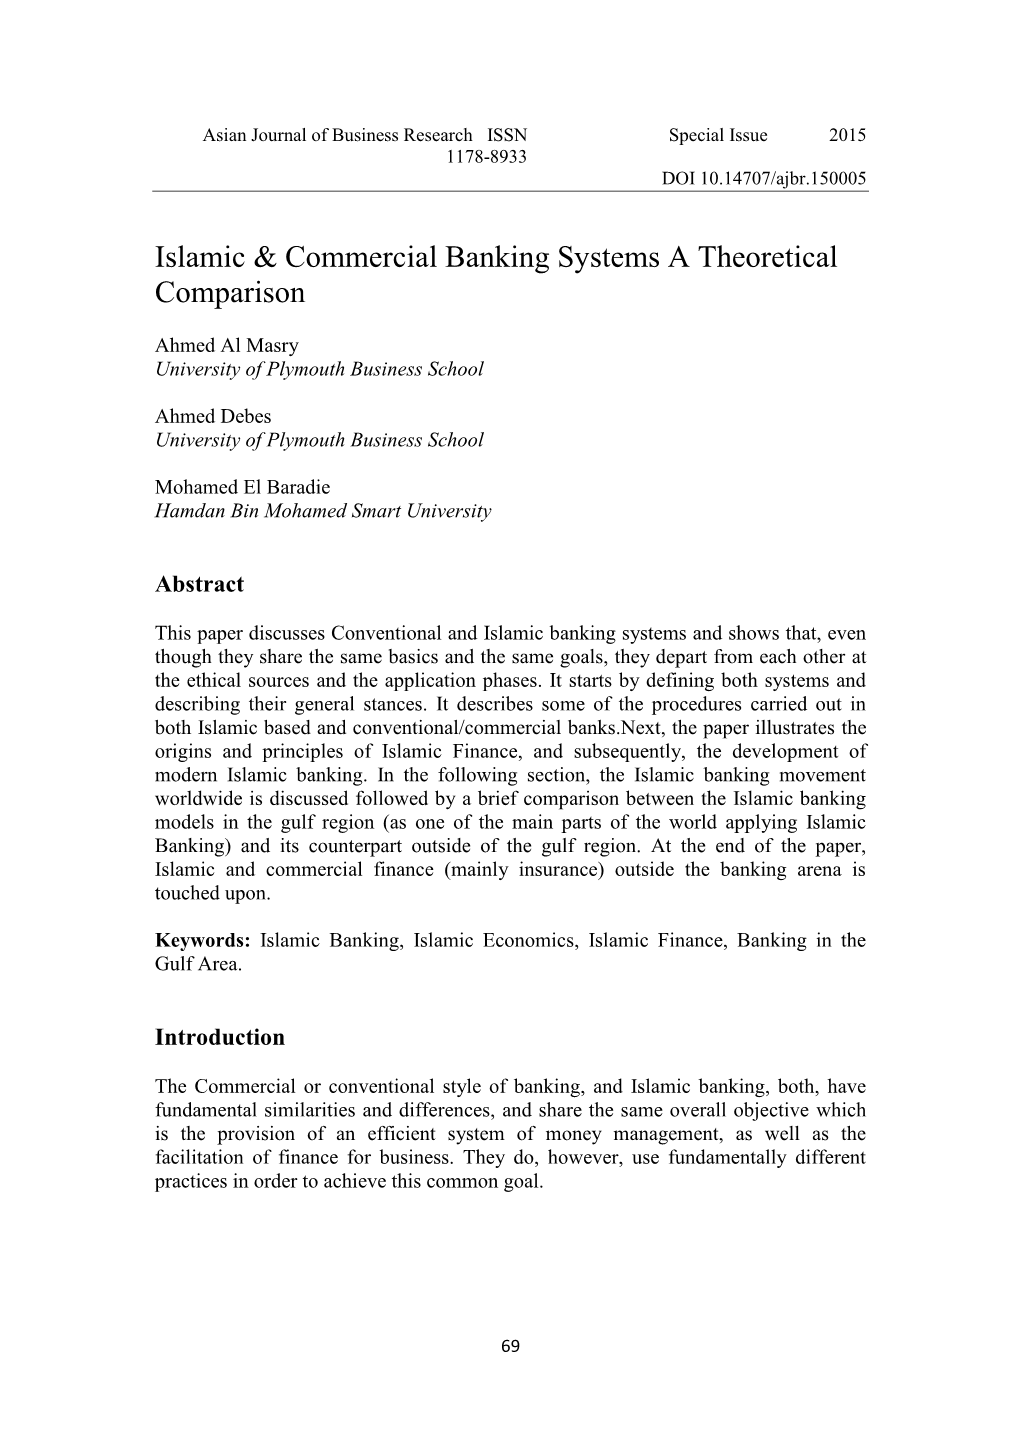 Islamic & Commercial Banking Systems a Theoretical Comparison